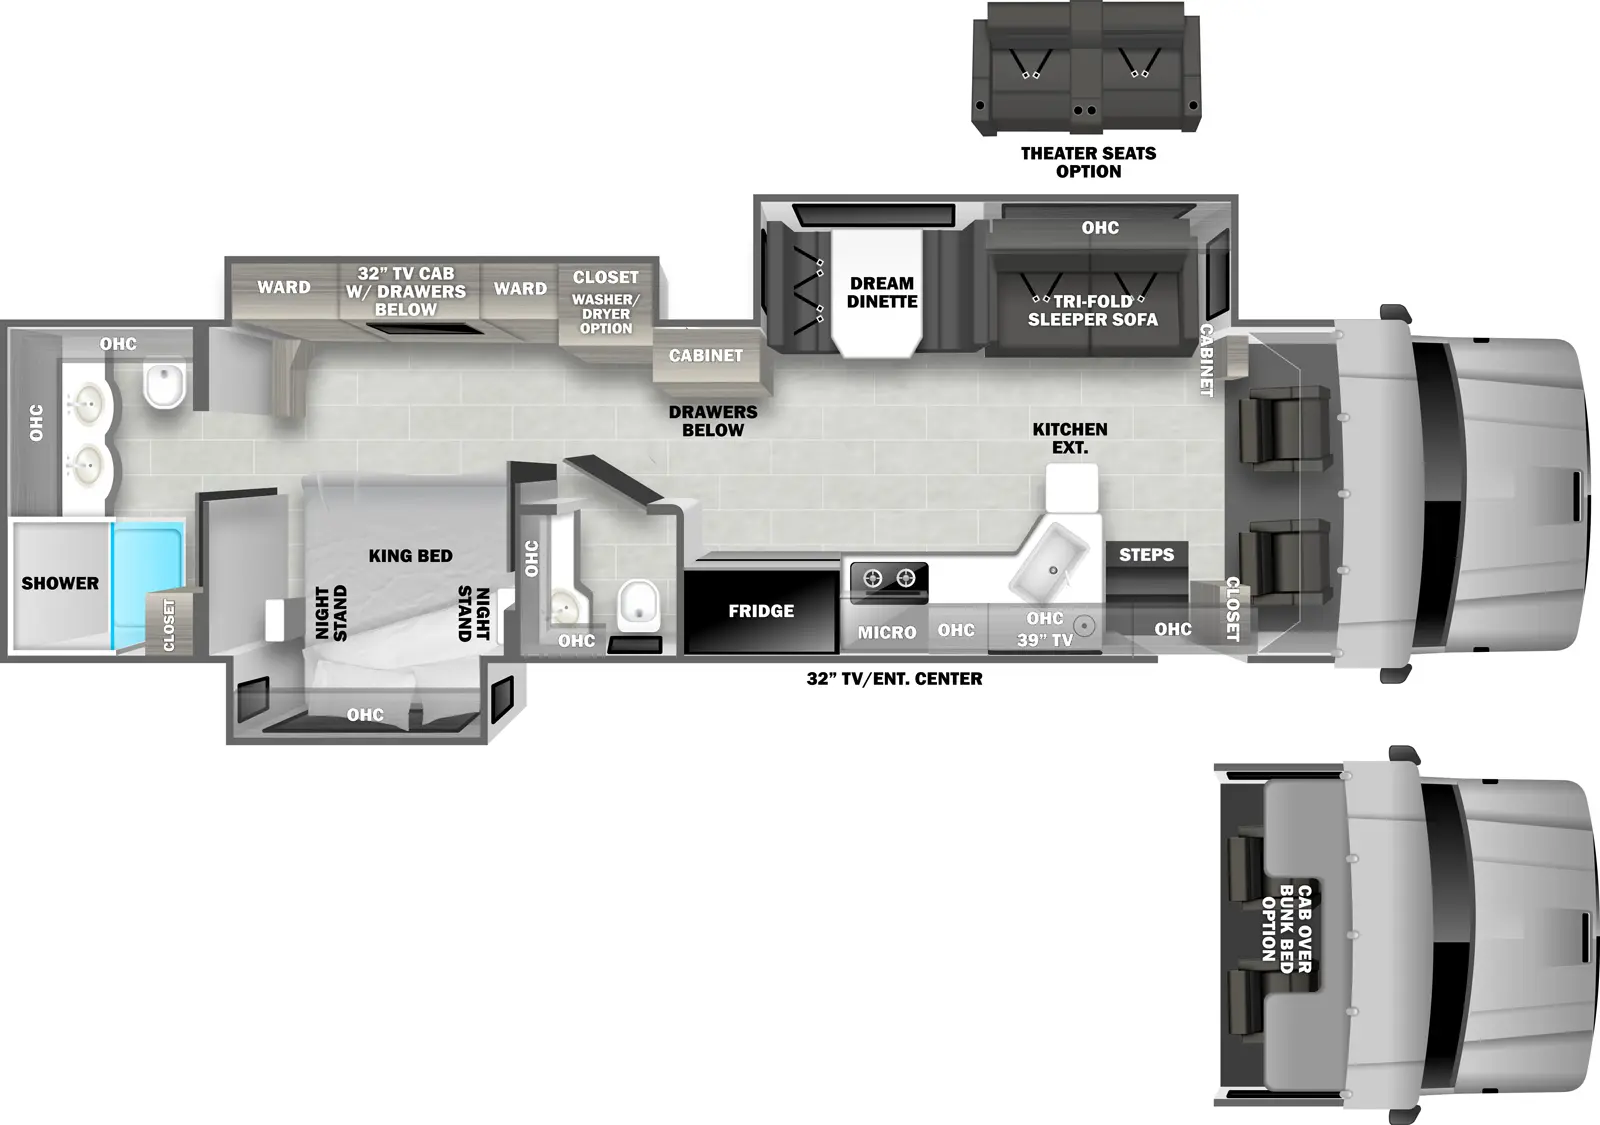 The 3700RB has three slideouts and one entry. Exterior features a TV/entertainment center. Interior layout front to back: cockpit (optional cab over bunk bed); off-door side cabinet, and slideout with tri-fold sleeper sofa (optional theater seating), overhead cabinet, and dream dinette; door side closet, entry, overhead cabinet, kitchen counter with extension, sink, TV, microwave, cooktop, and refrigerator; off-door side cabinet with drawers below, and slideout with closet with washer/dryer option, and wardrobes with TV and drawers below; door side full bathroom with overhead cabinet; door side king bed slideout with overhead cabinet and night stands on each side; rear full bathroom with dual sinks, closet, and overhead cabinets.